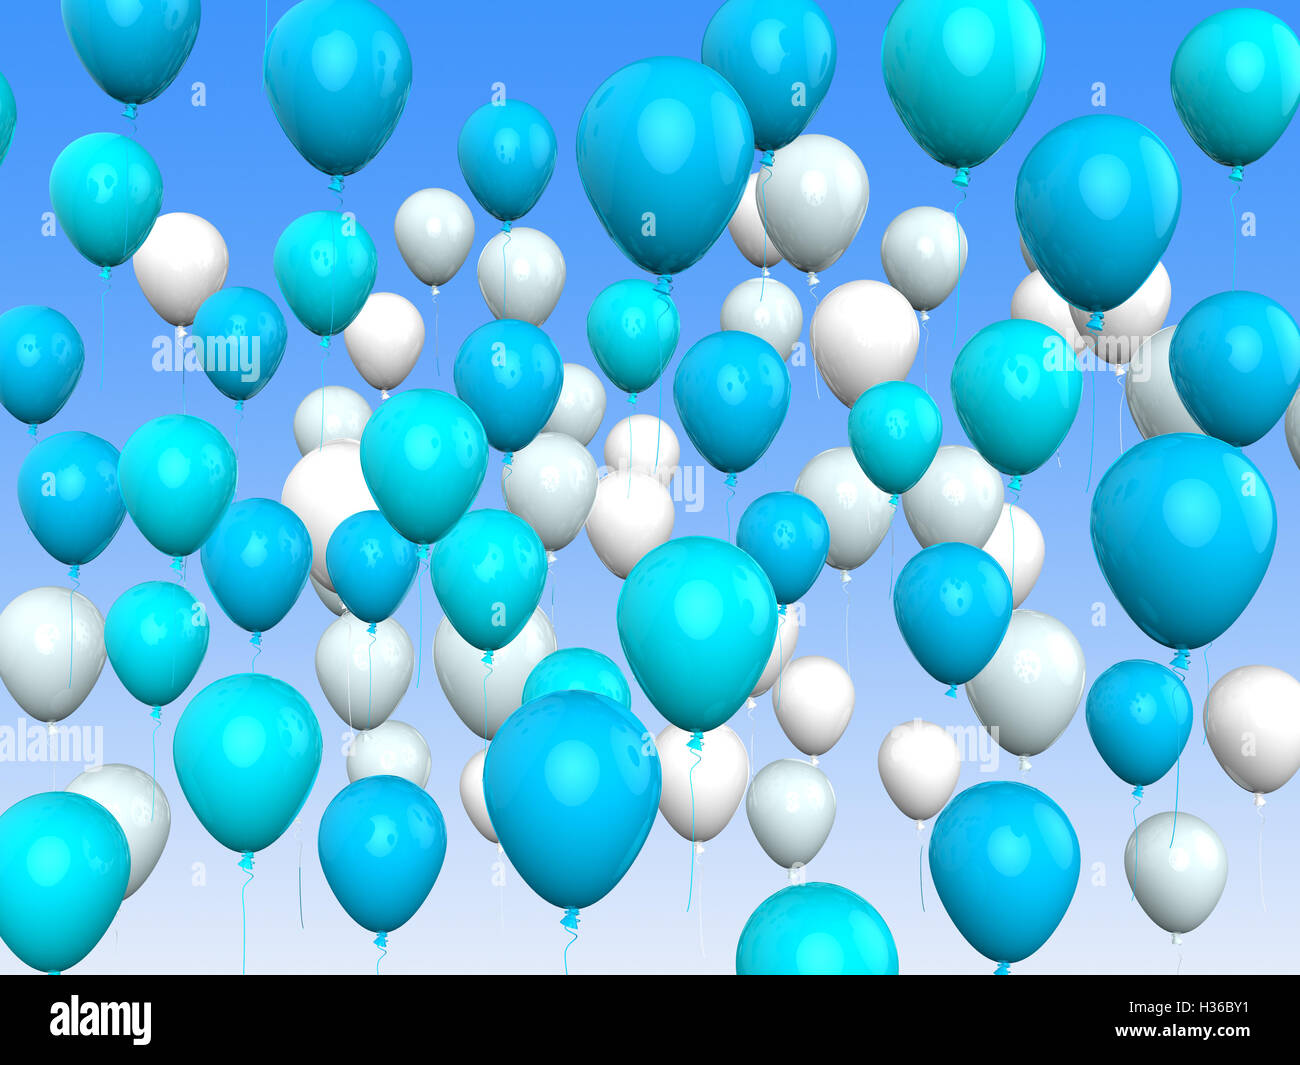 Floating Light Blue And White Balloons Mean Argentinean Flag Or Stock Photo